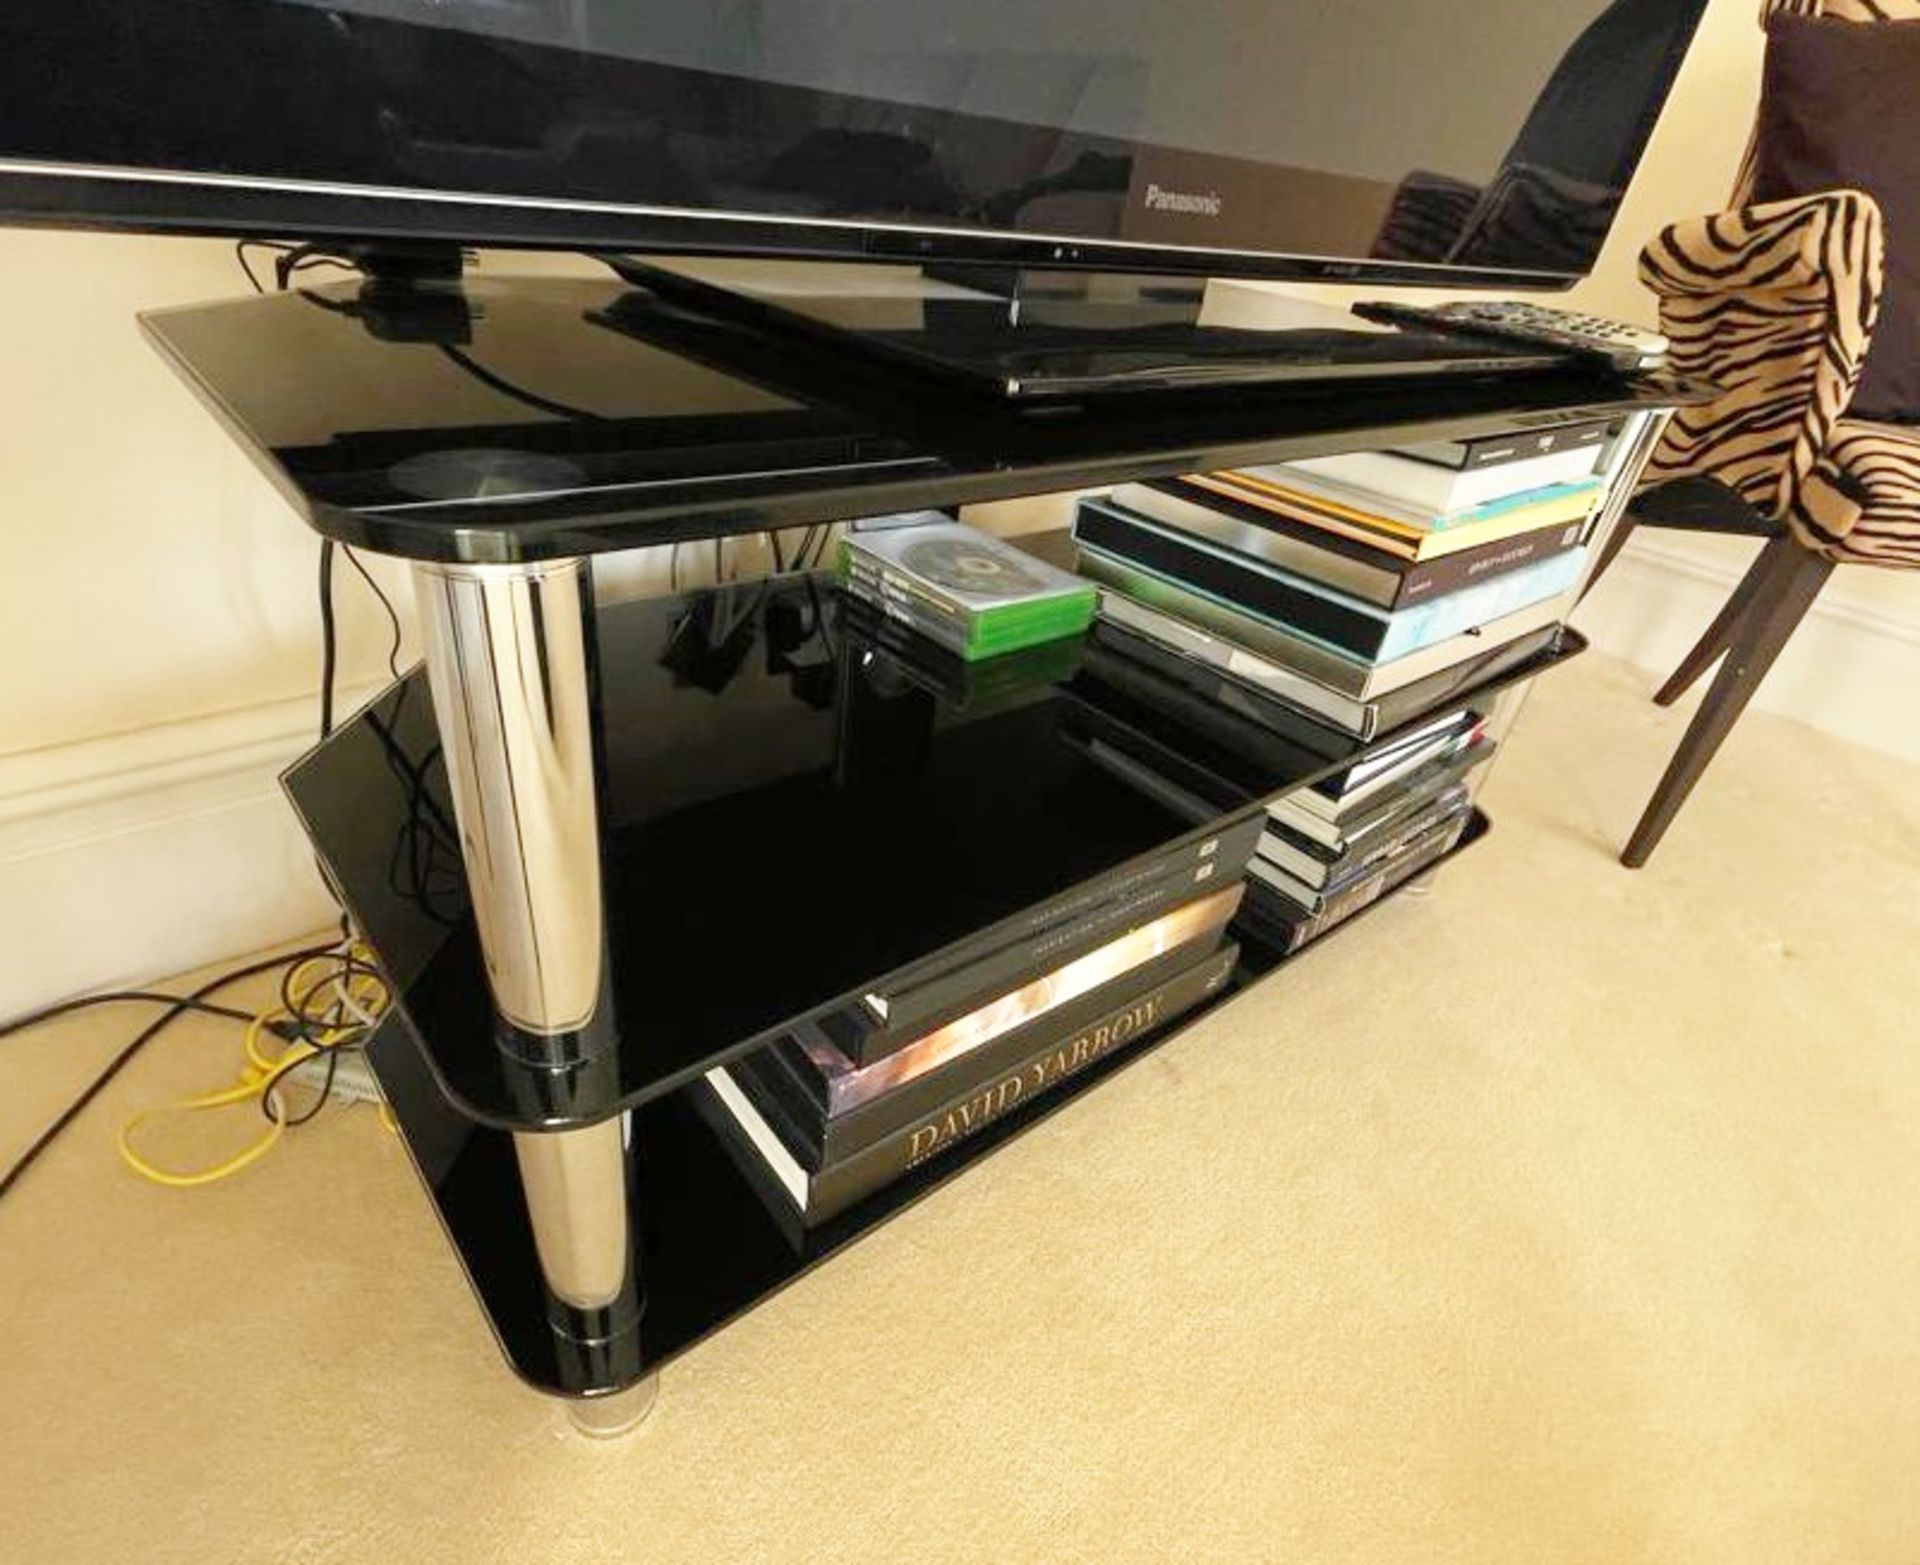 1 x Modern TV Stand With Black Glass Shelves and Chrome Supports - Size: H52 x W105 x D45 cms - NO - Image 4 of 4